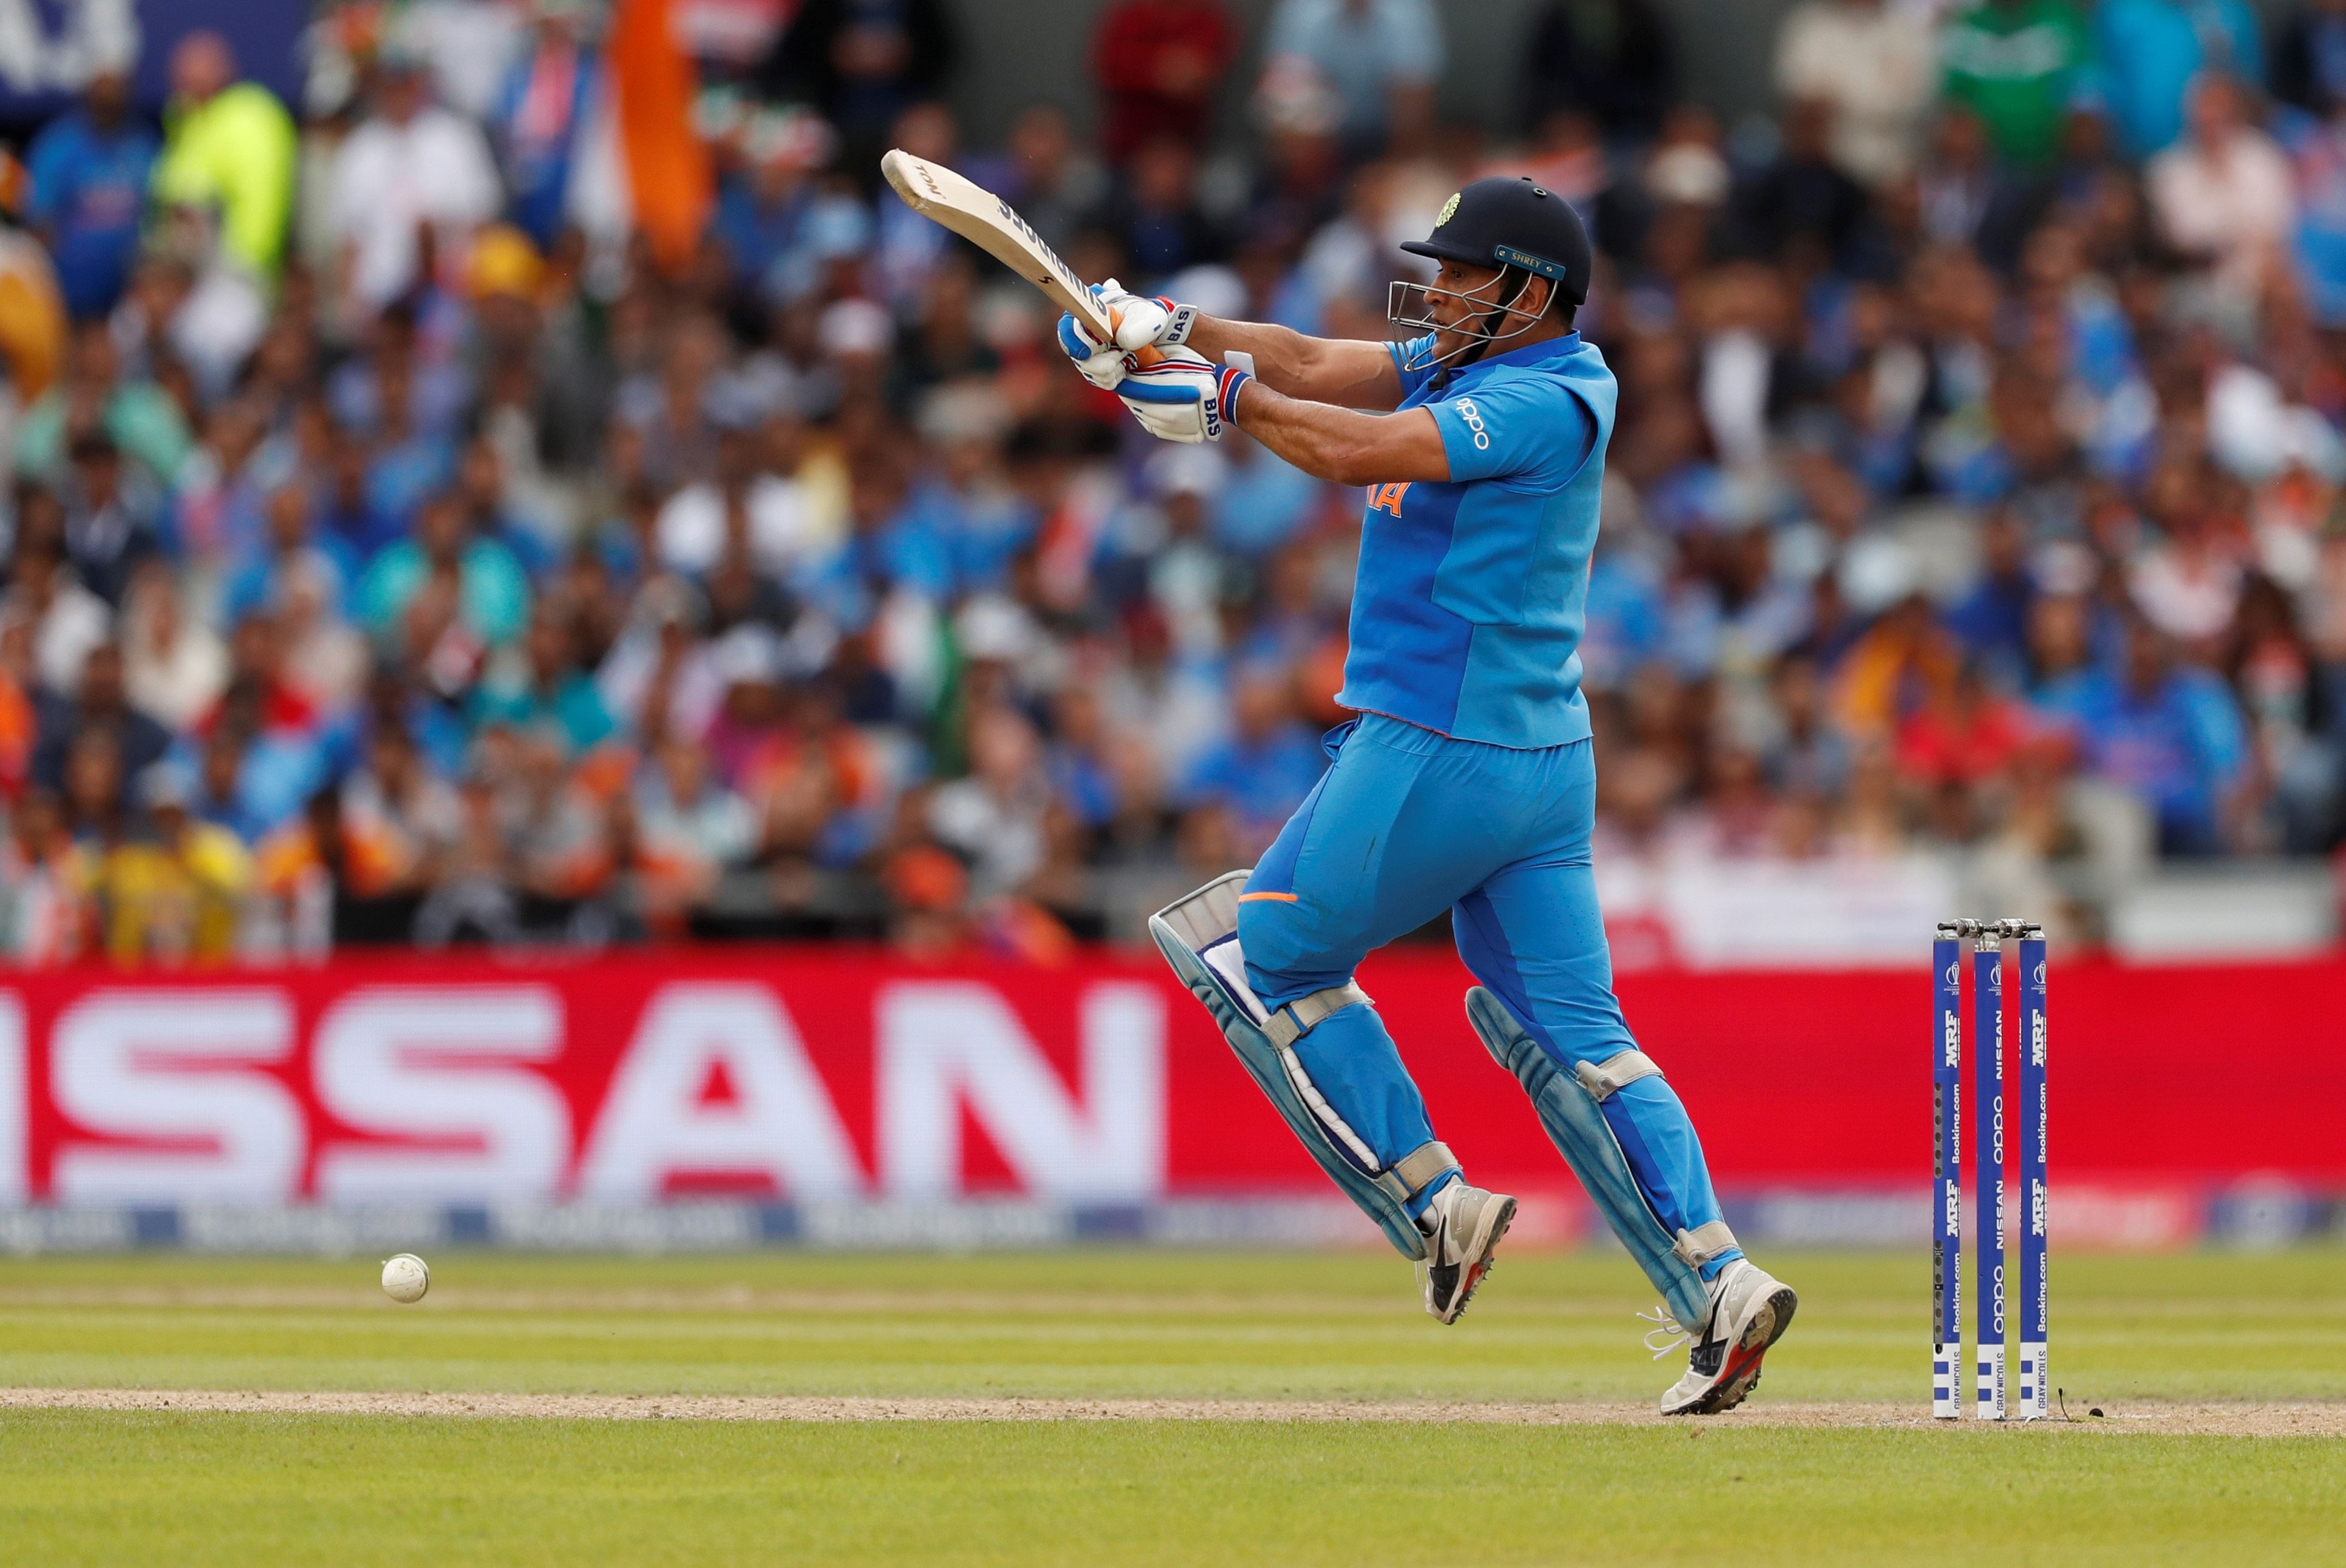 MS Dhoni in action in the ICC Cricket World Cup Semi Final - India v New Zealand. Credit: Reuters Photo